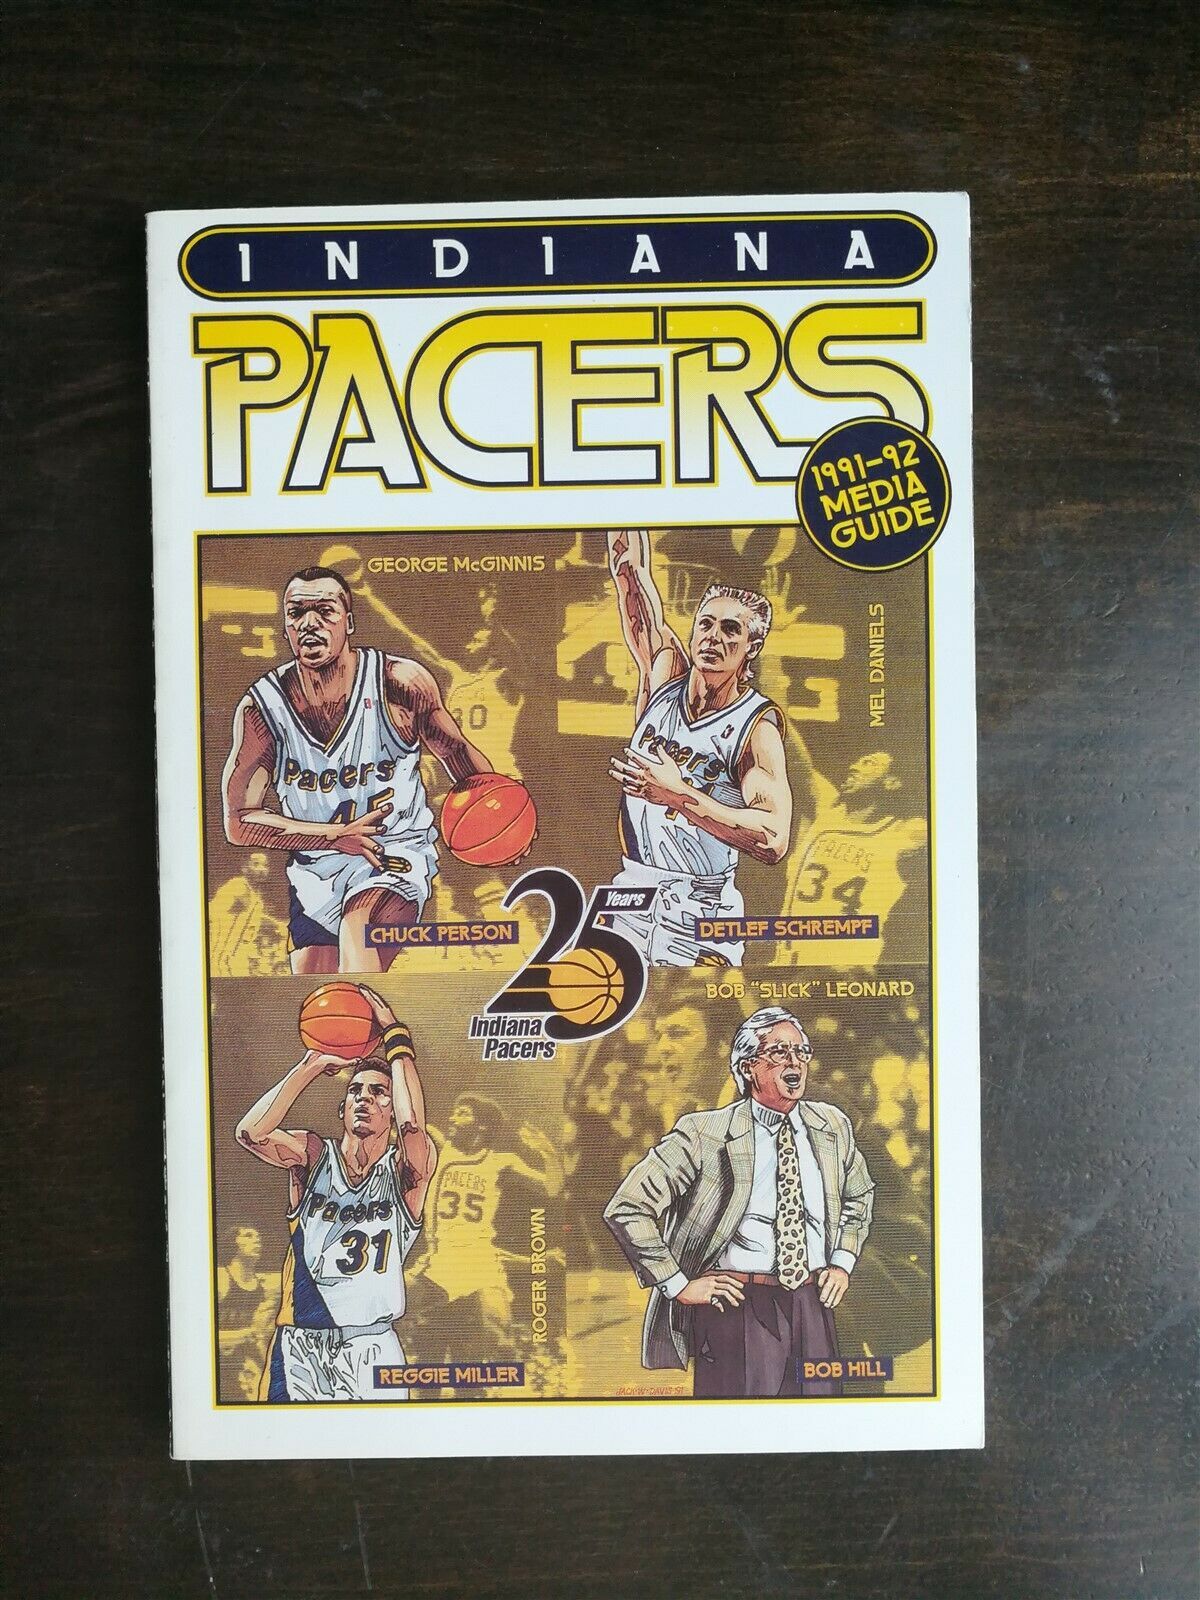 Primary image for Indiana Pacers Reggie Miller 1991-1992 NBA Basketball Media Guide